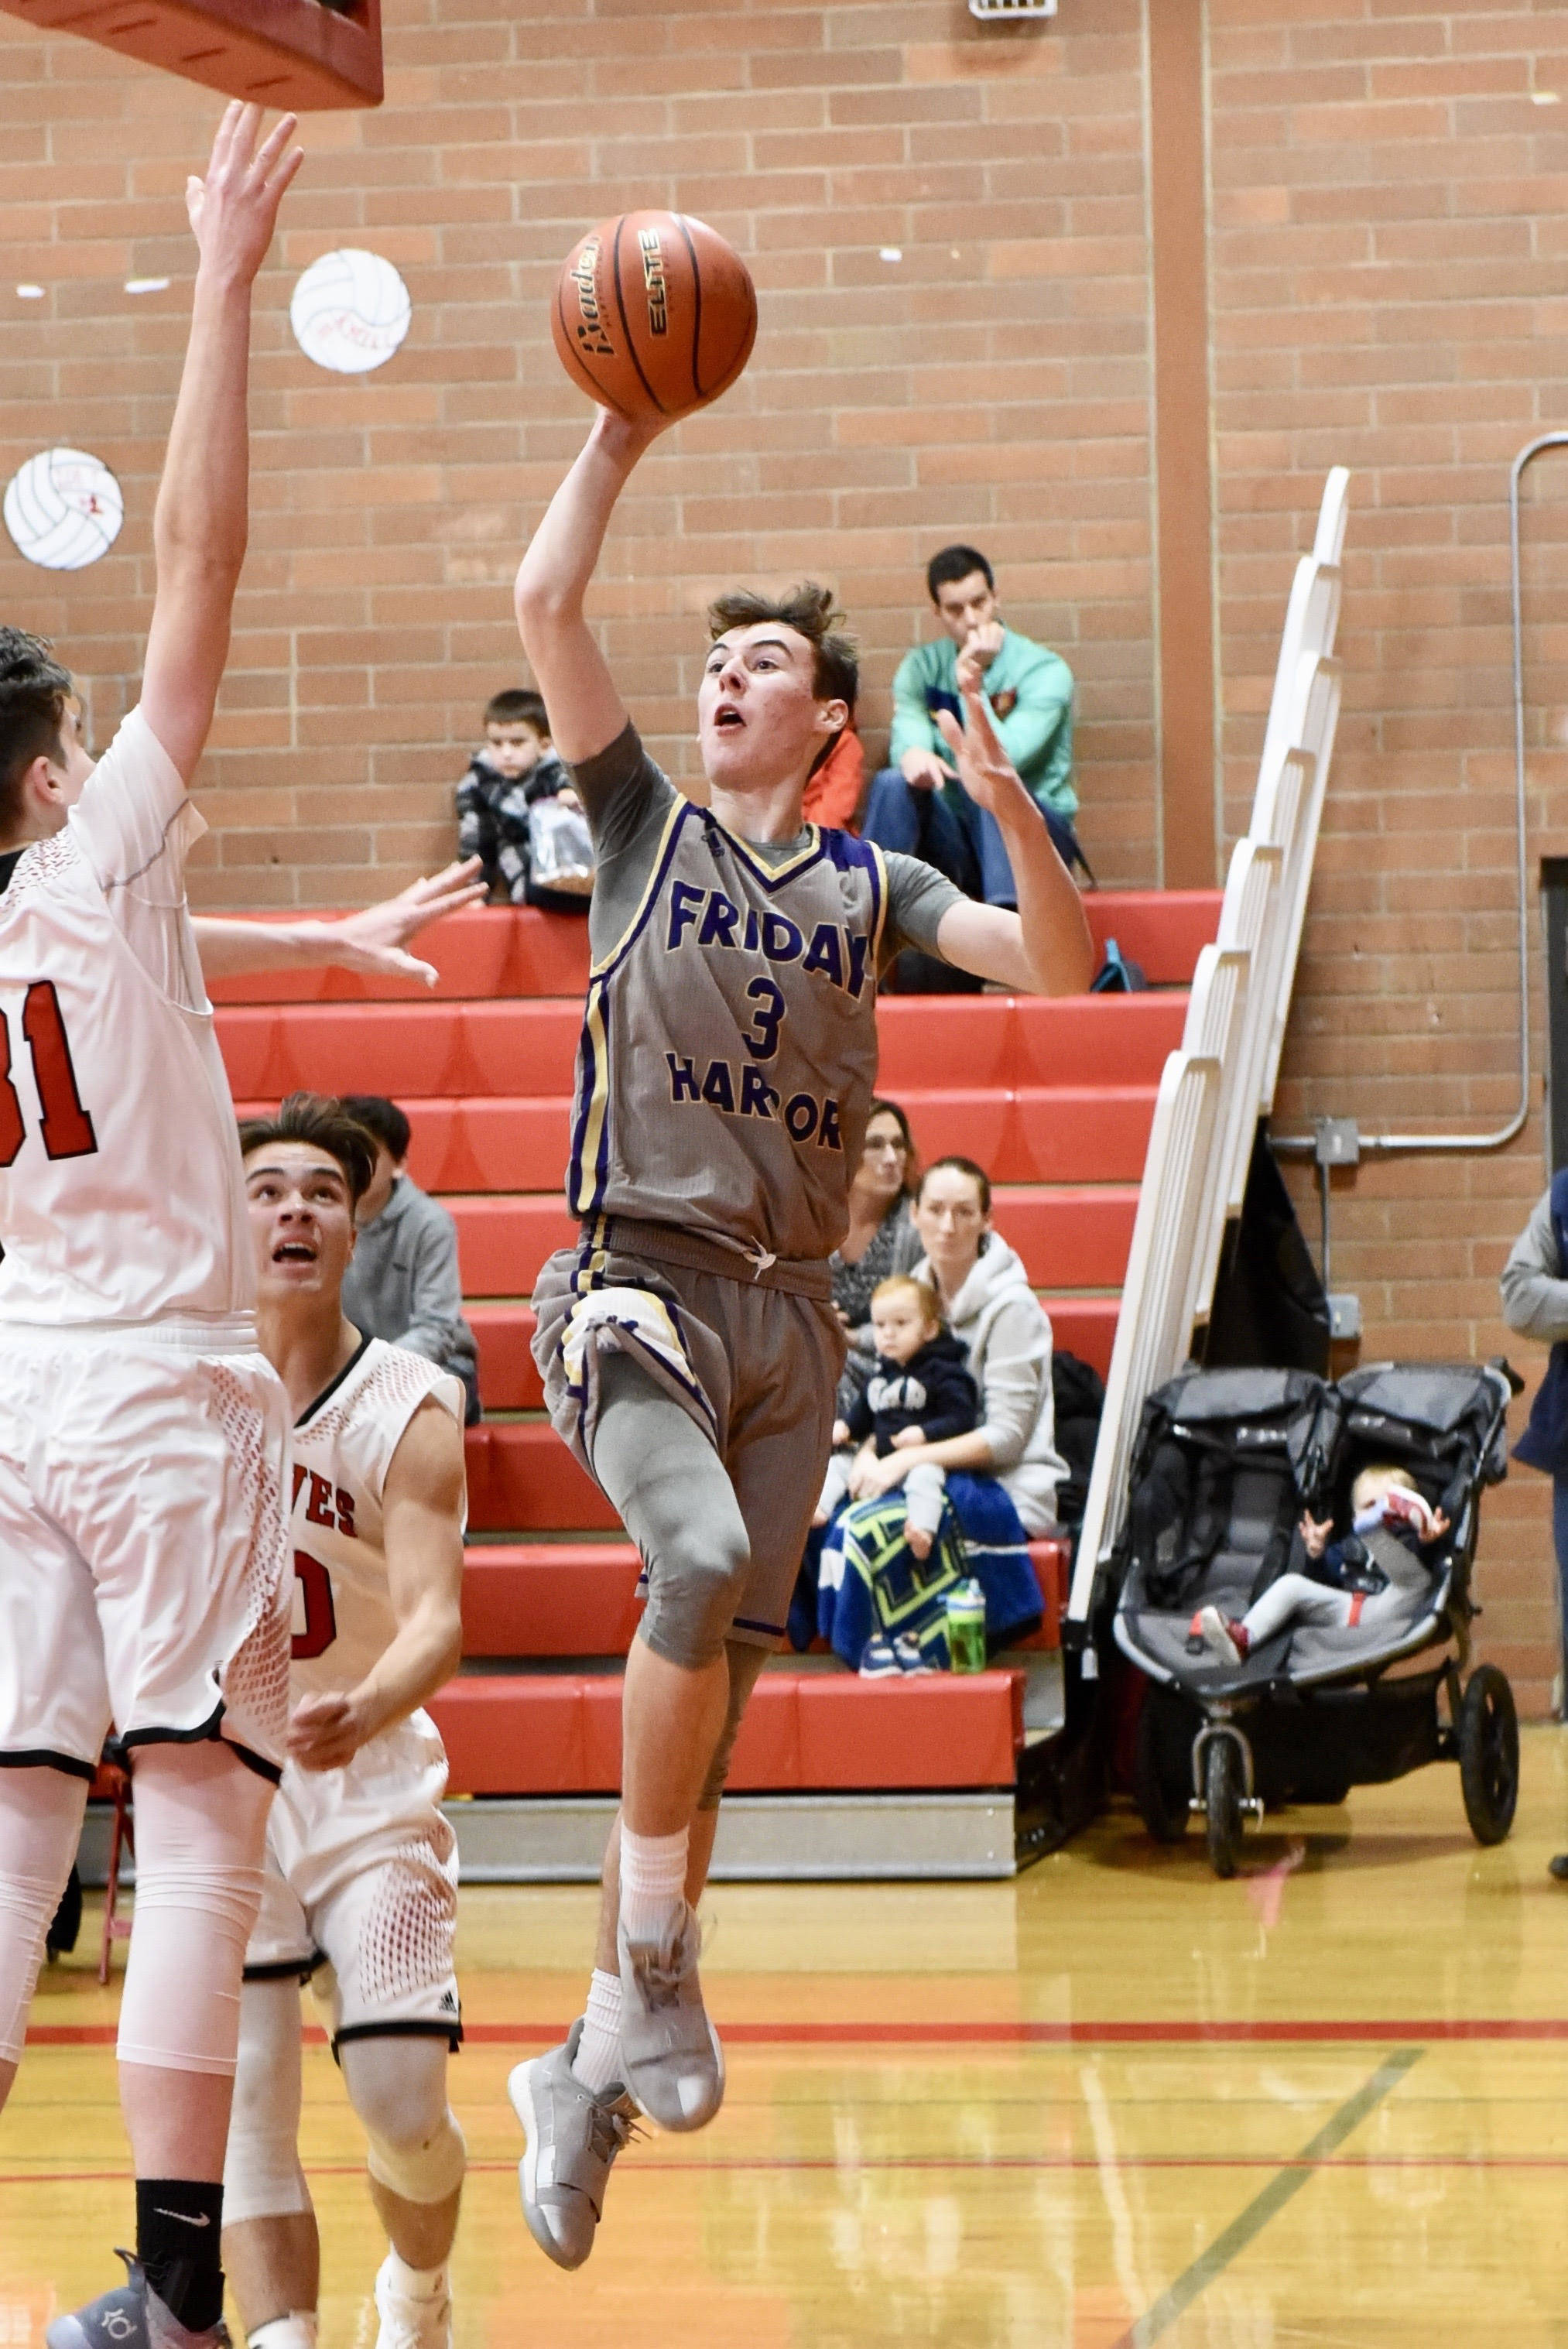 Contributed photo/John Stimpson                                Lucas Chevalier makes a jumper from the baseline for 2 more points.